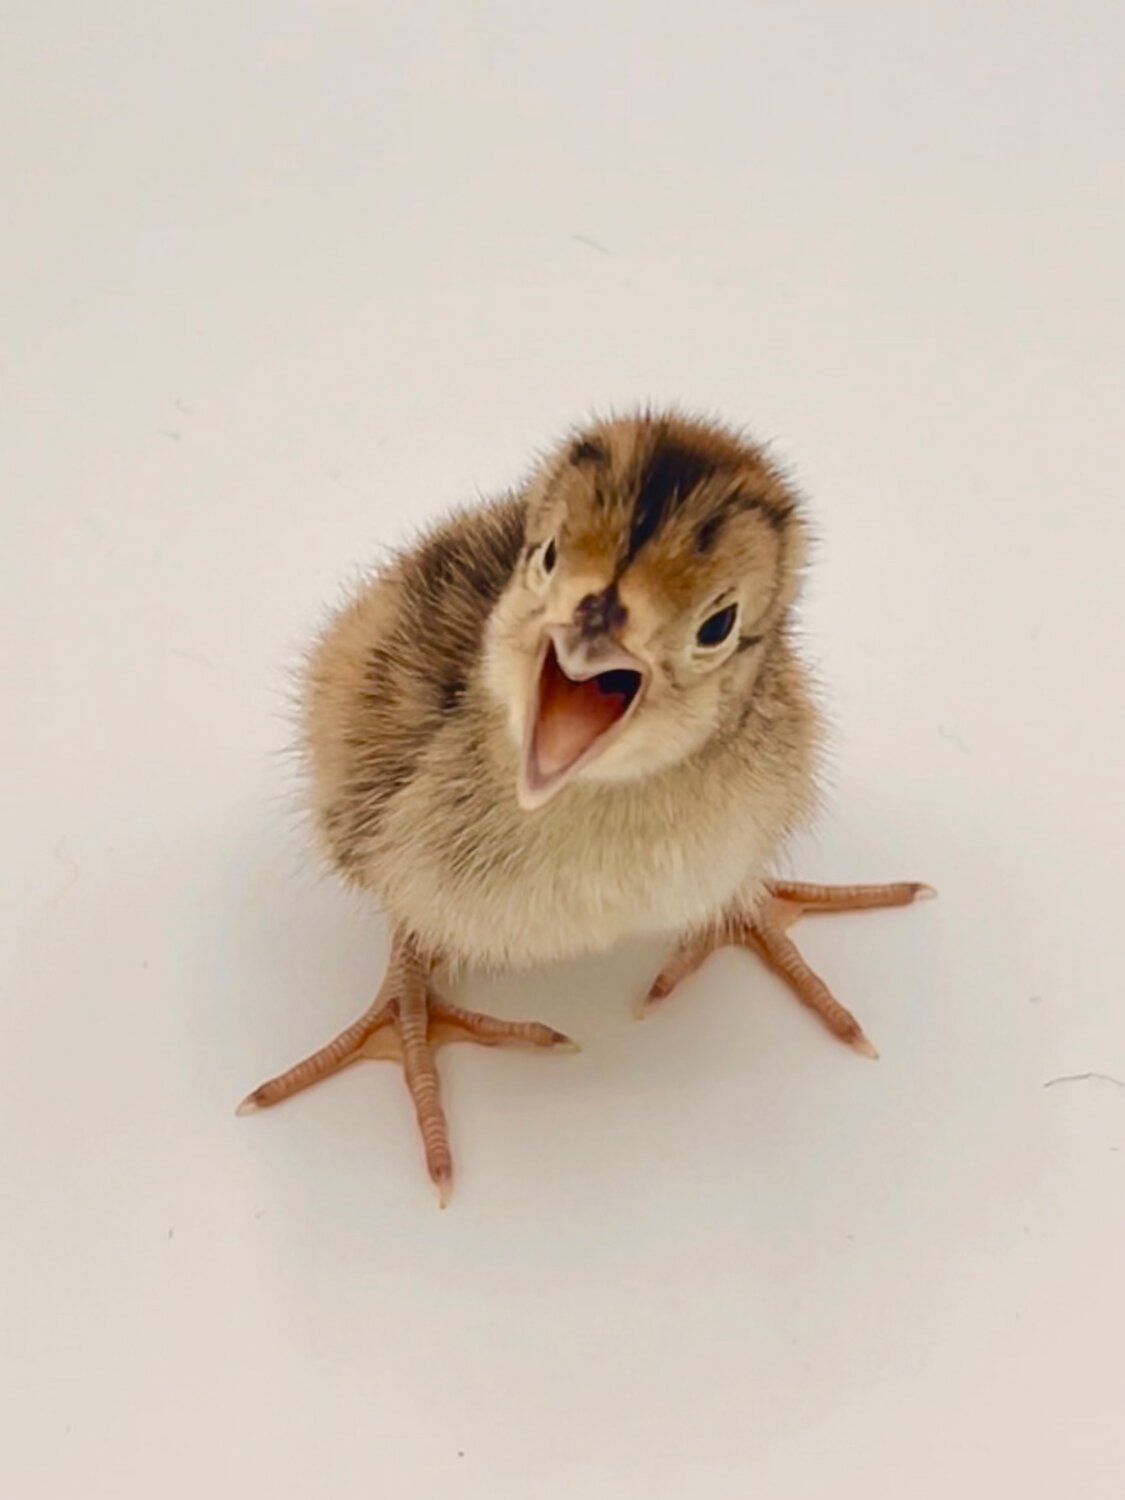 A two-day-old pheasant possibly doesn't wish to be photographed.